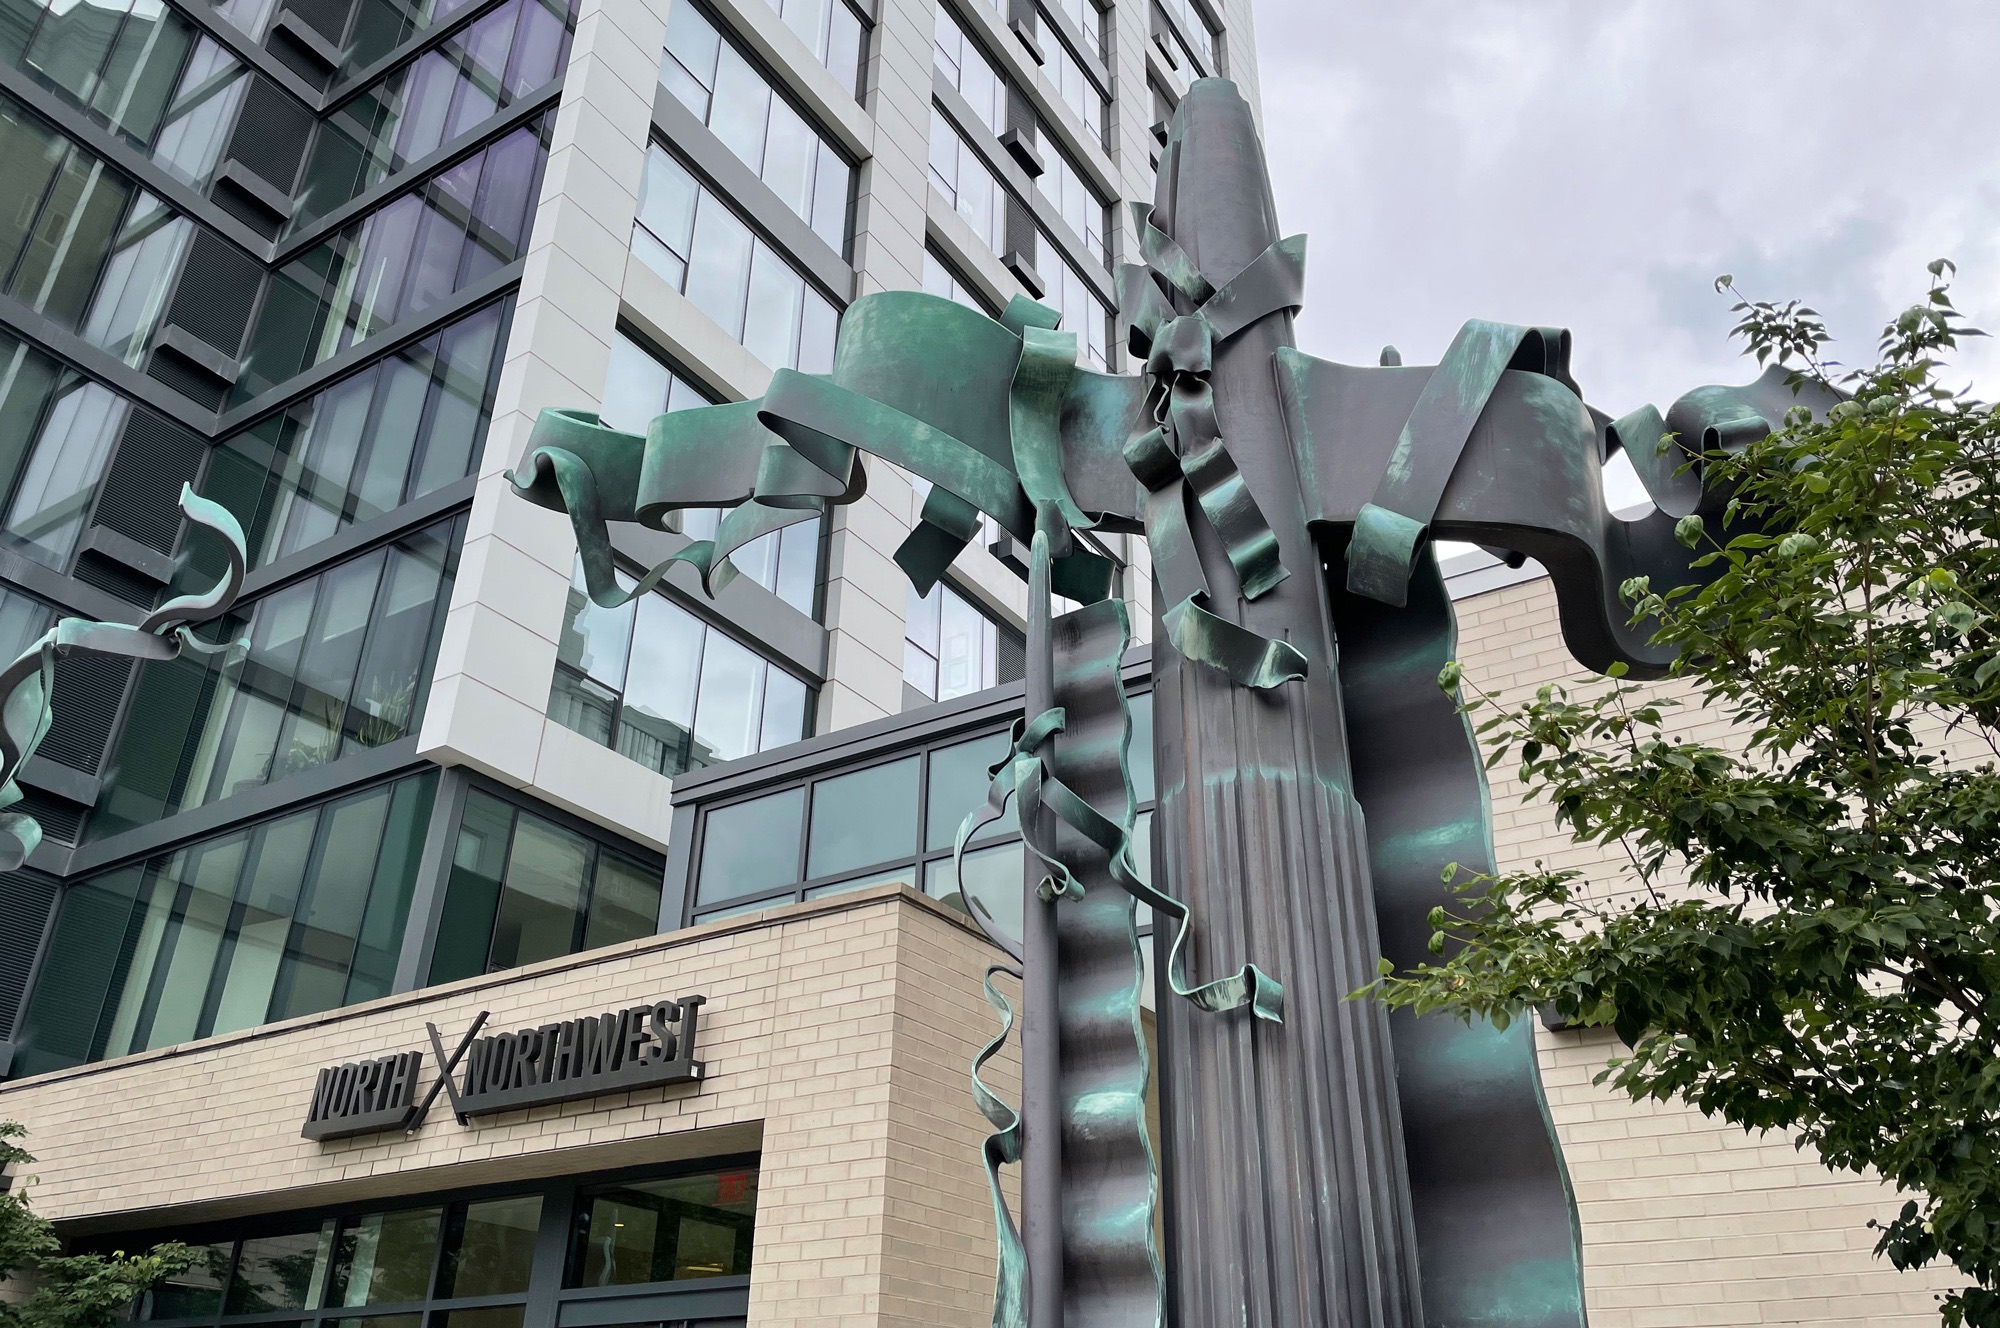 Close-up of Albert Paley’s steel sculpture at a building entrance: two tall columns are wrapped with banner and ribbon shapes that seem to be fluttering in the breeze